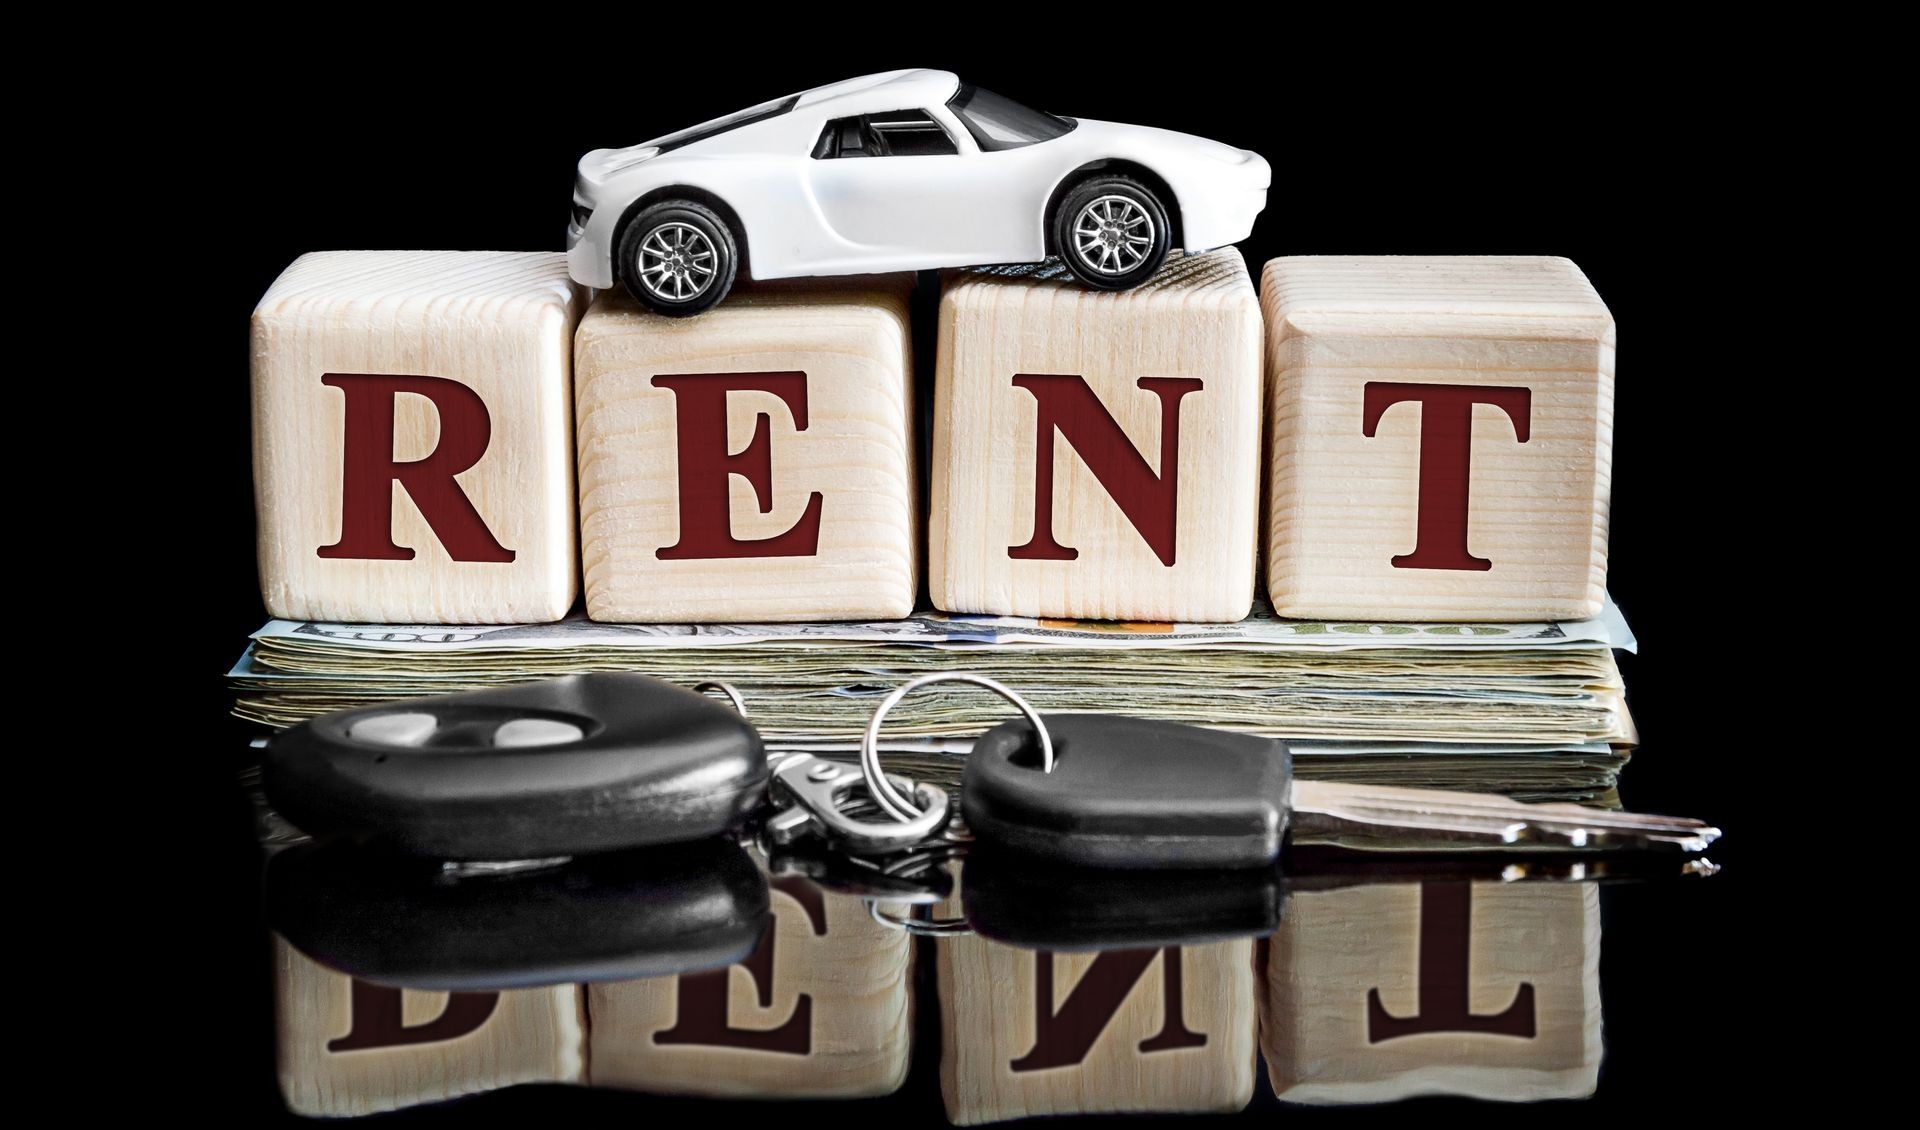 Wooden cubes with word RENT, car model, money and car keys on black reflective background.